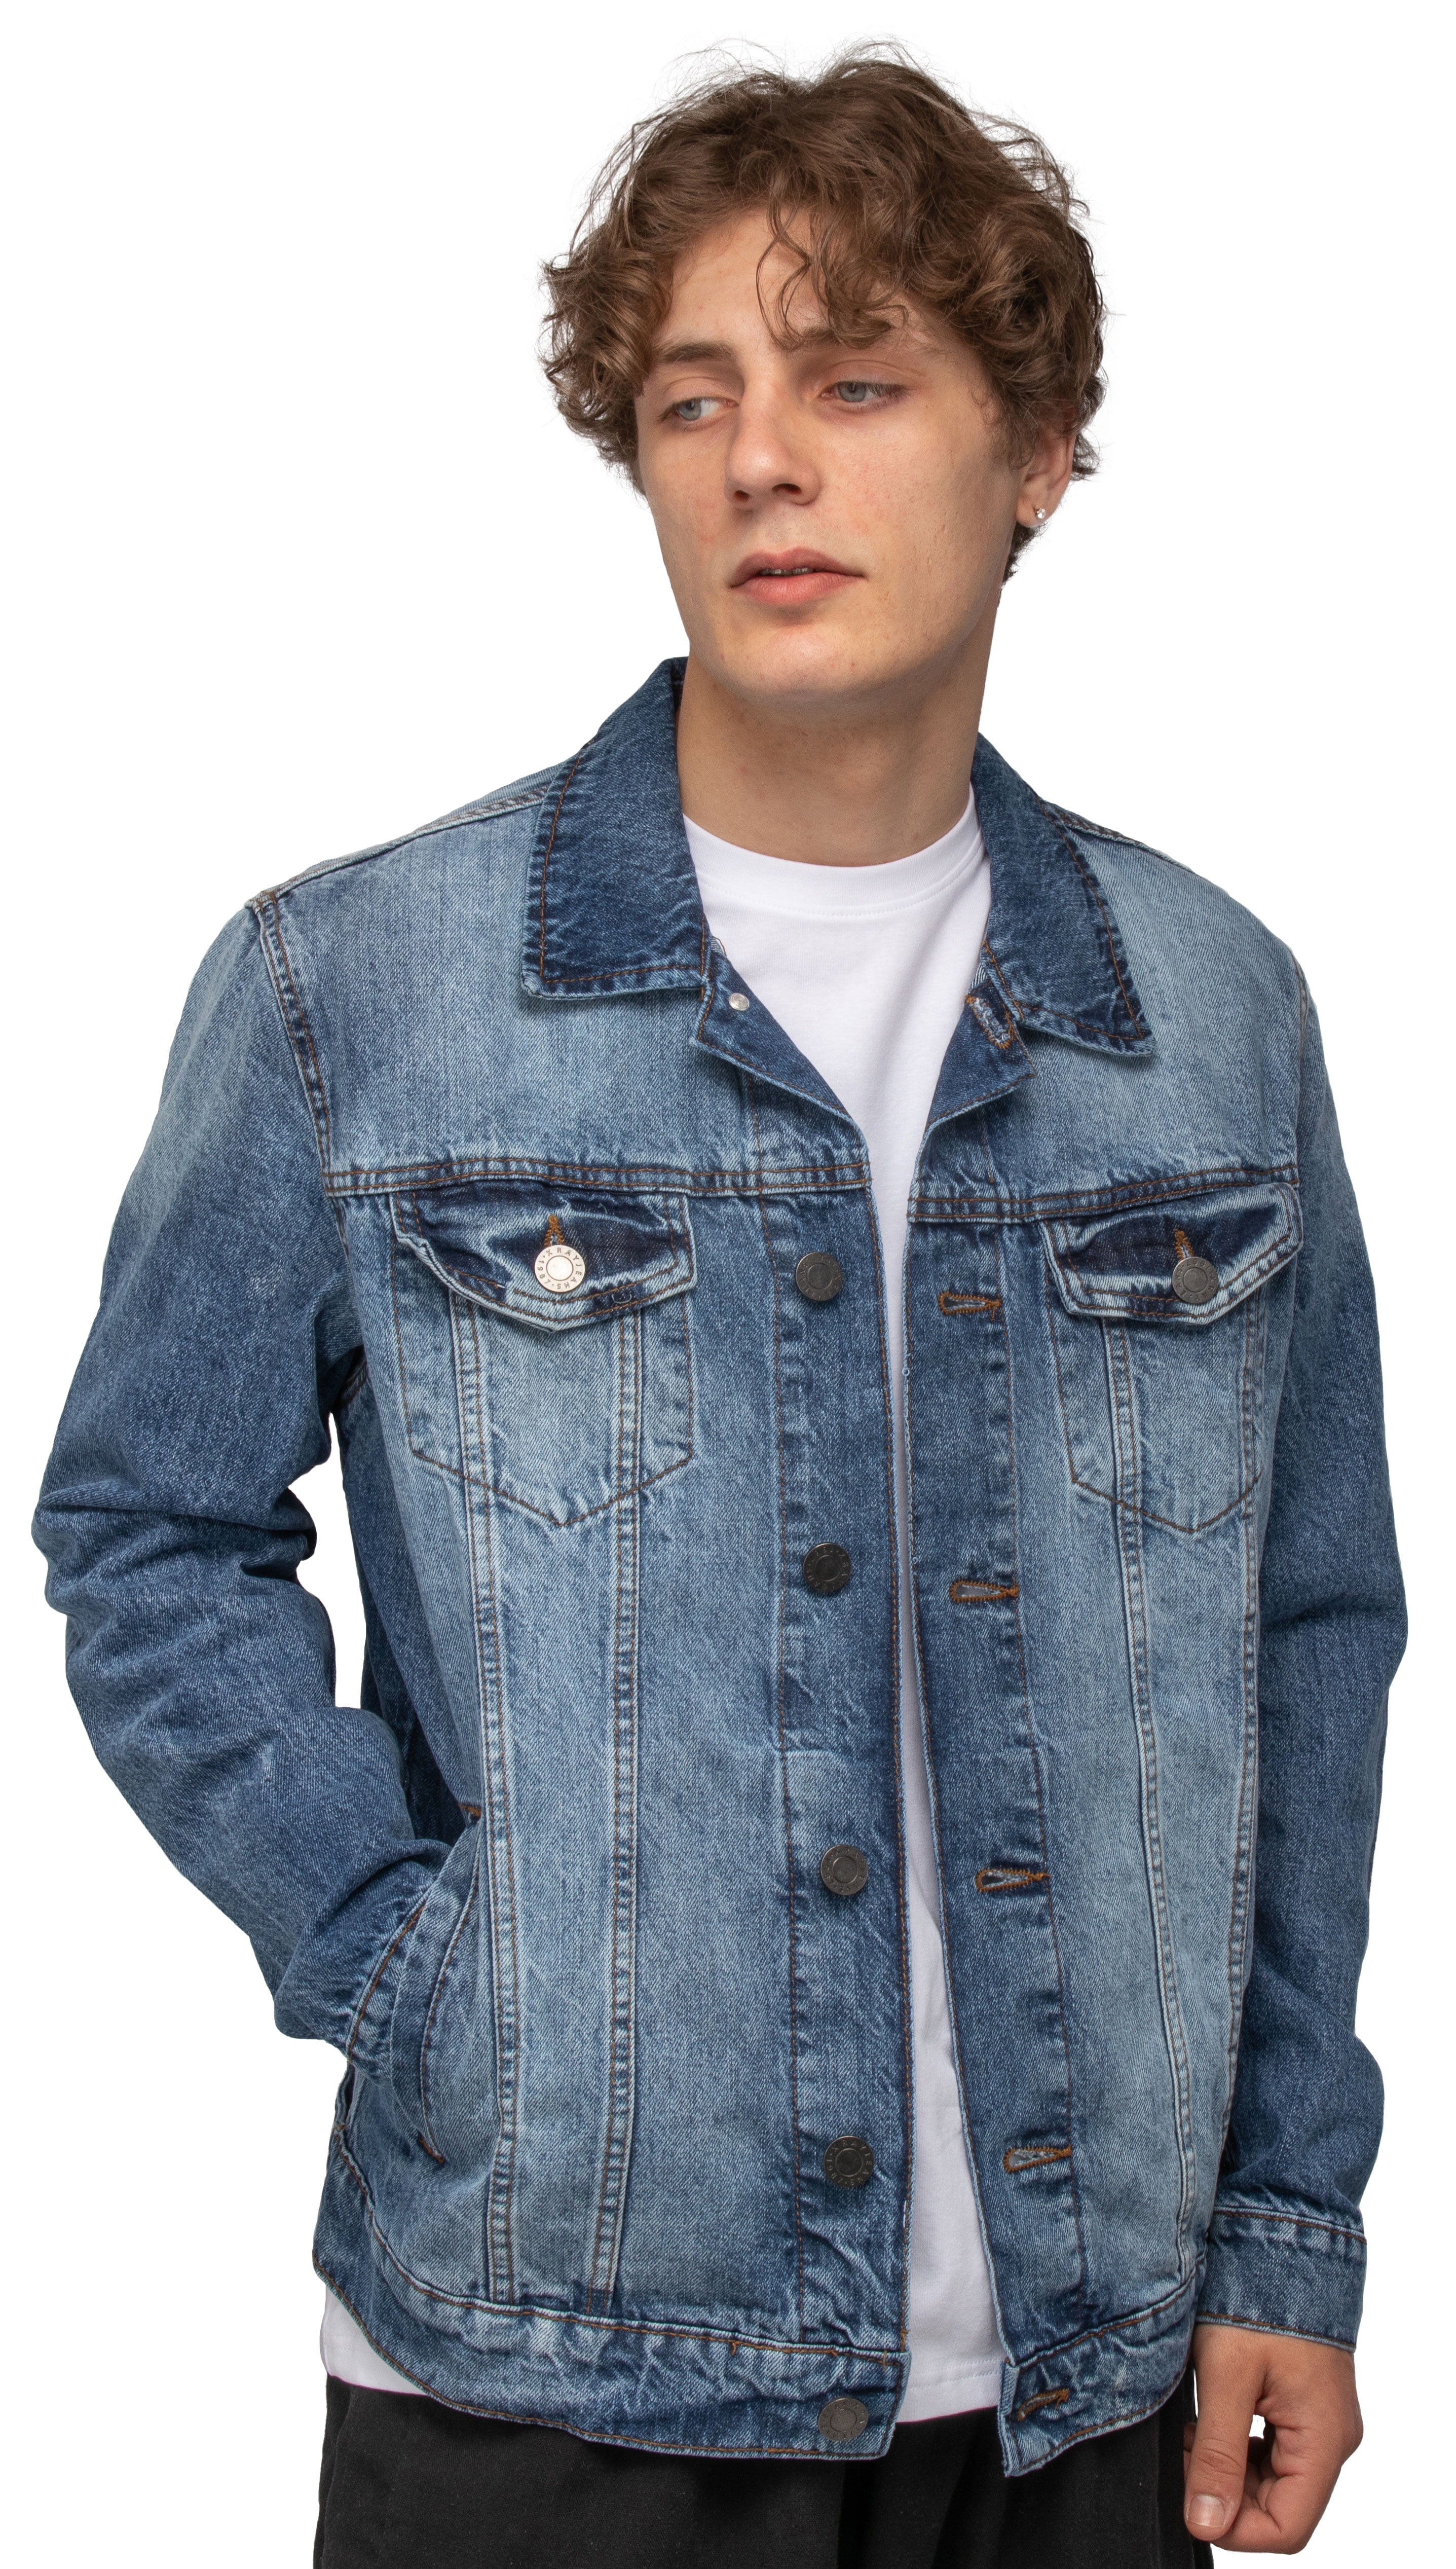 Acid Wash Denim Jacket Outfits For Men (2 ideas & outfits) | Lookastic